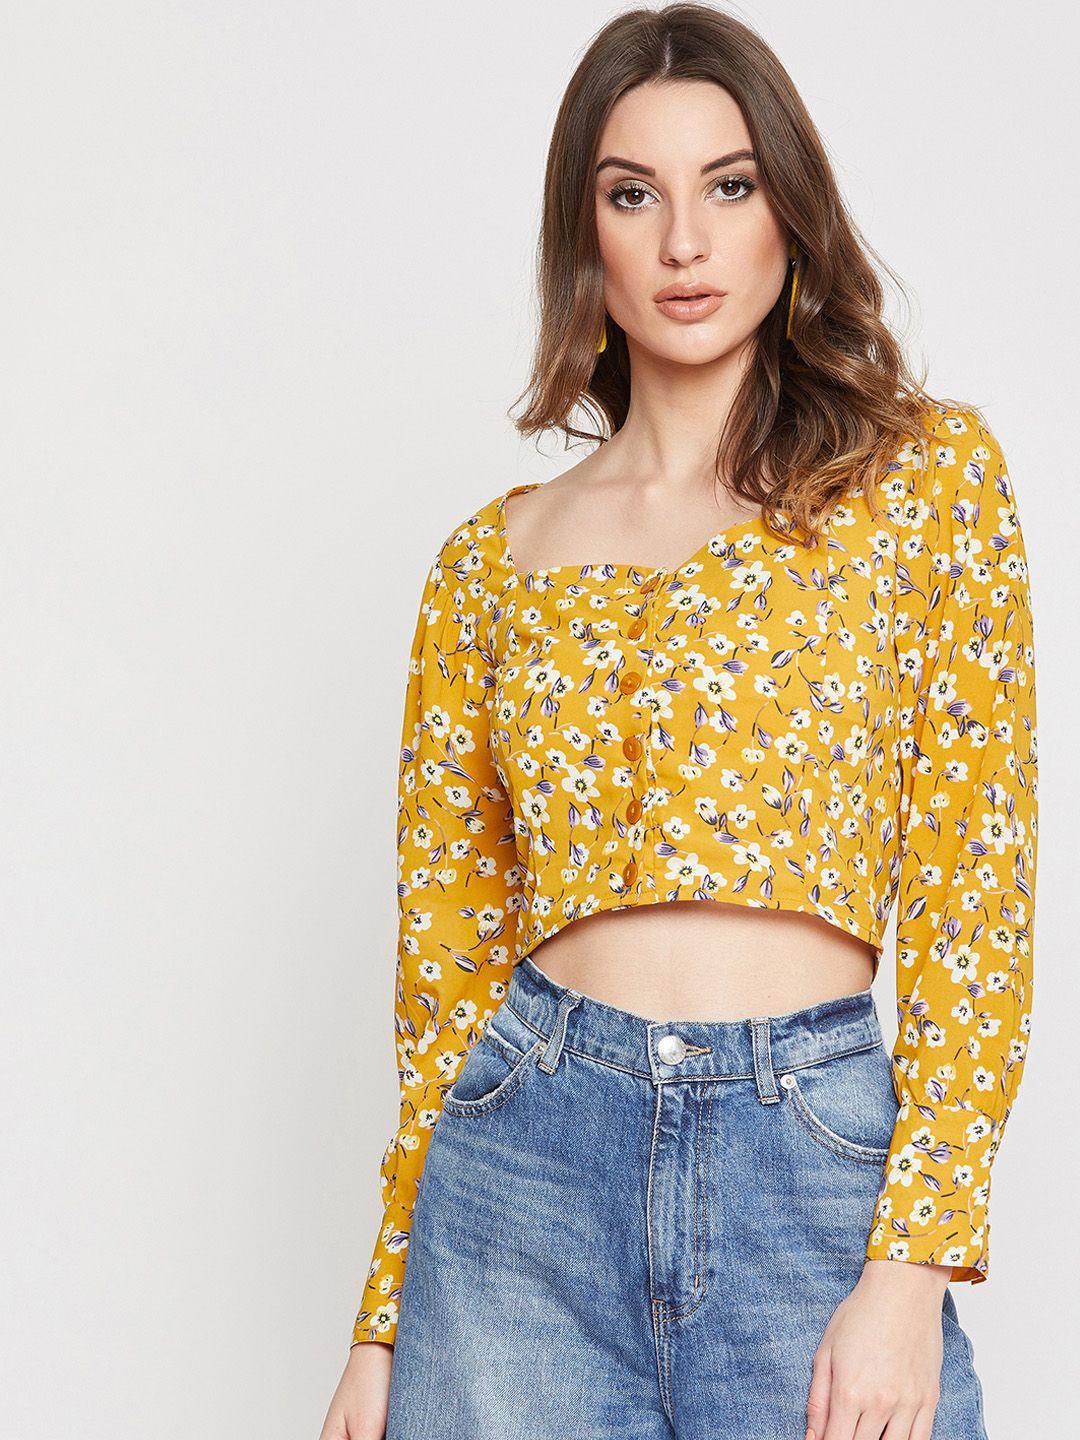 marie claire mustard yellow floral print crop top